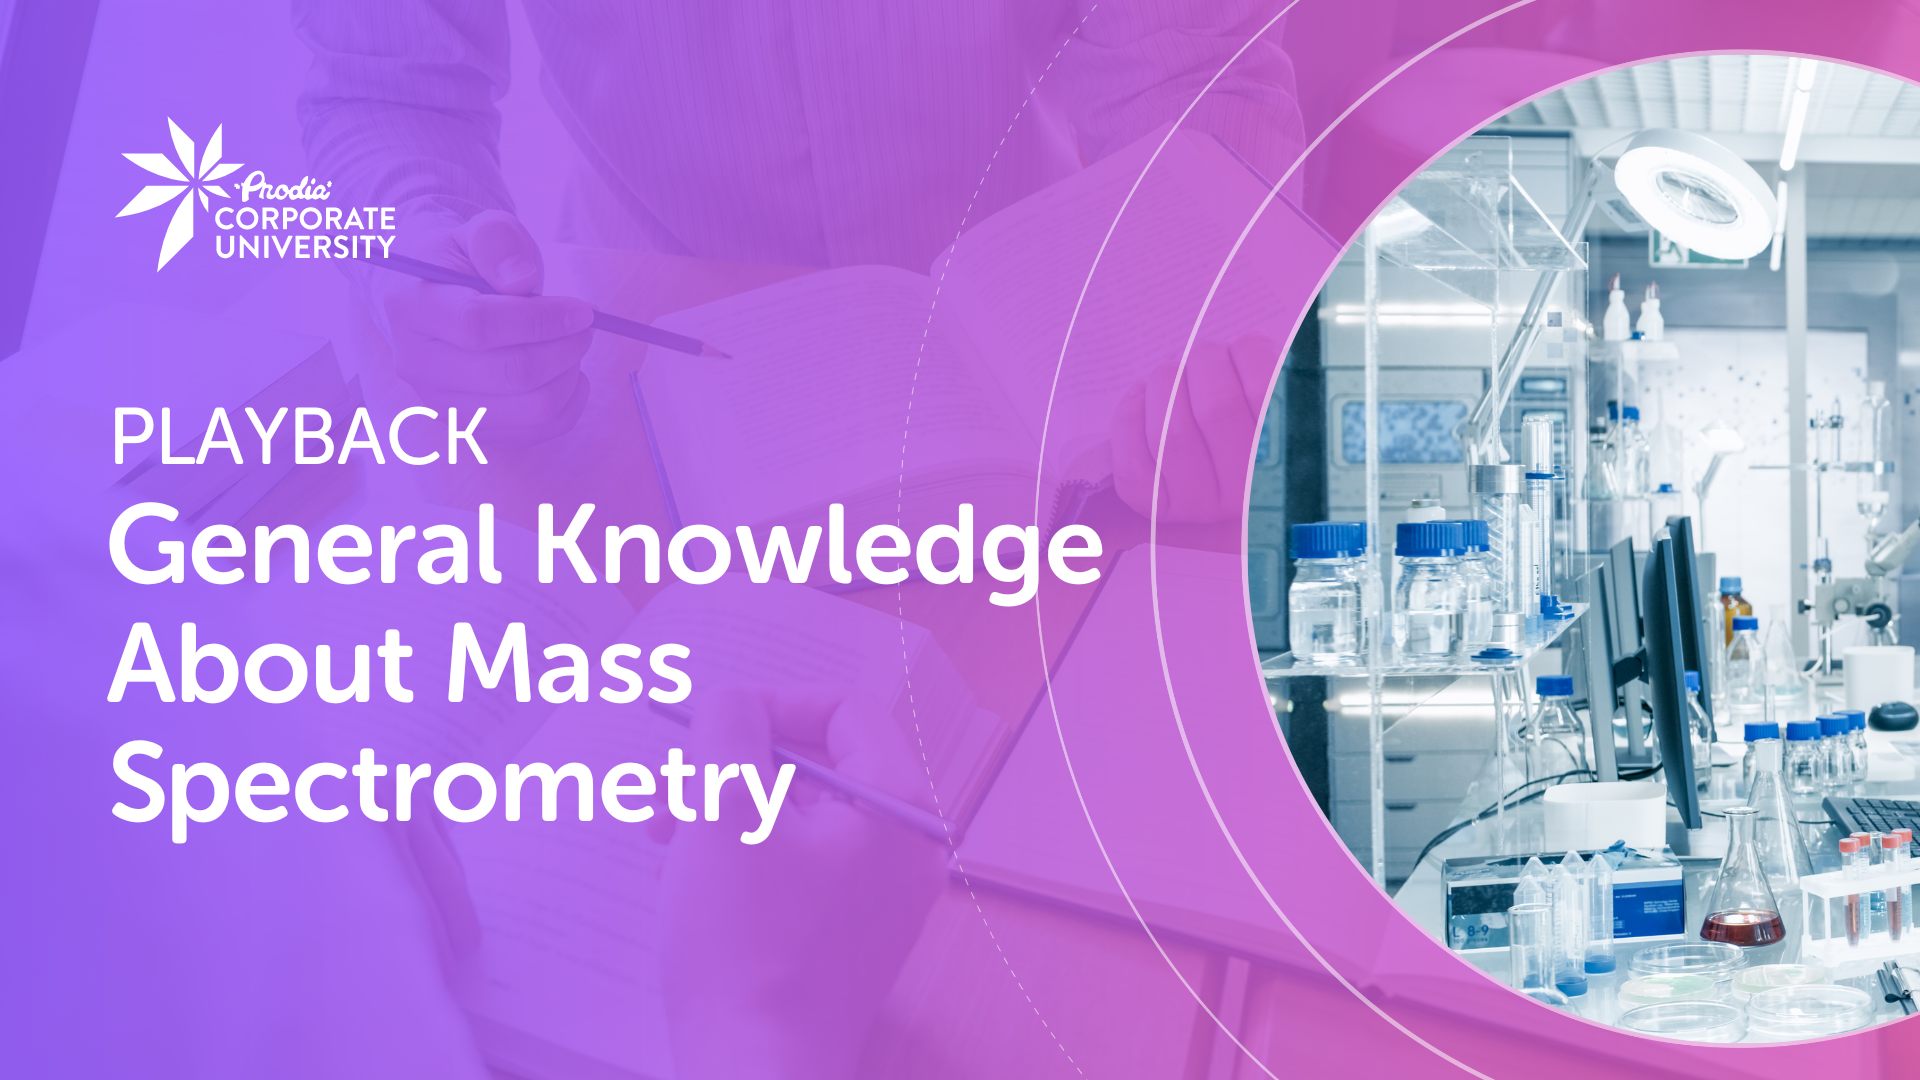 Workshop General Knowledge of Clinical Mass Spectrometry